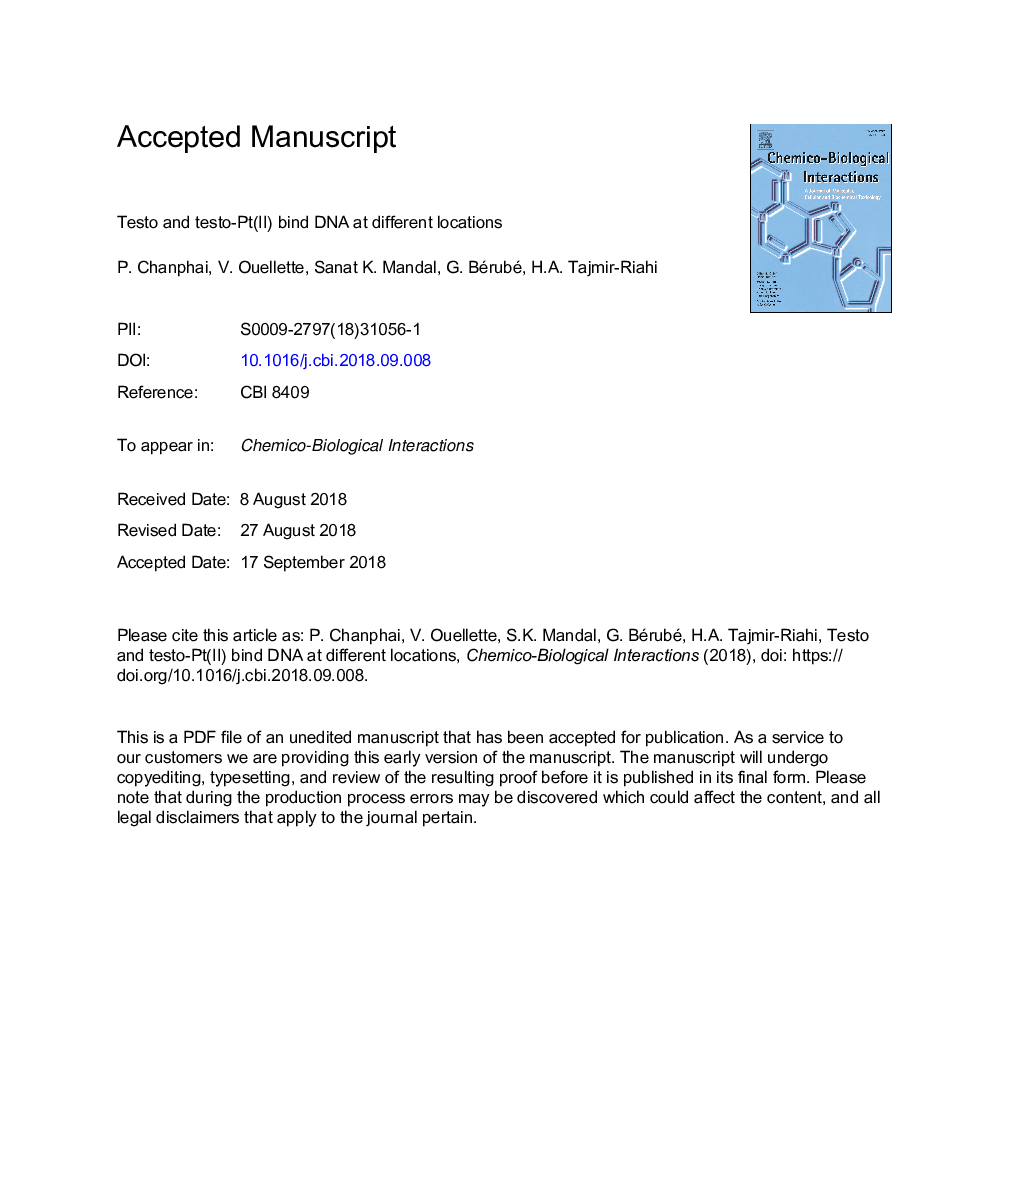 Testo and testo-Pt(II) bind DNA at different locations